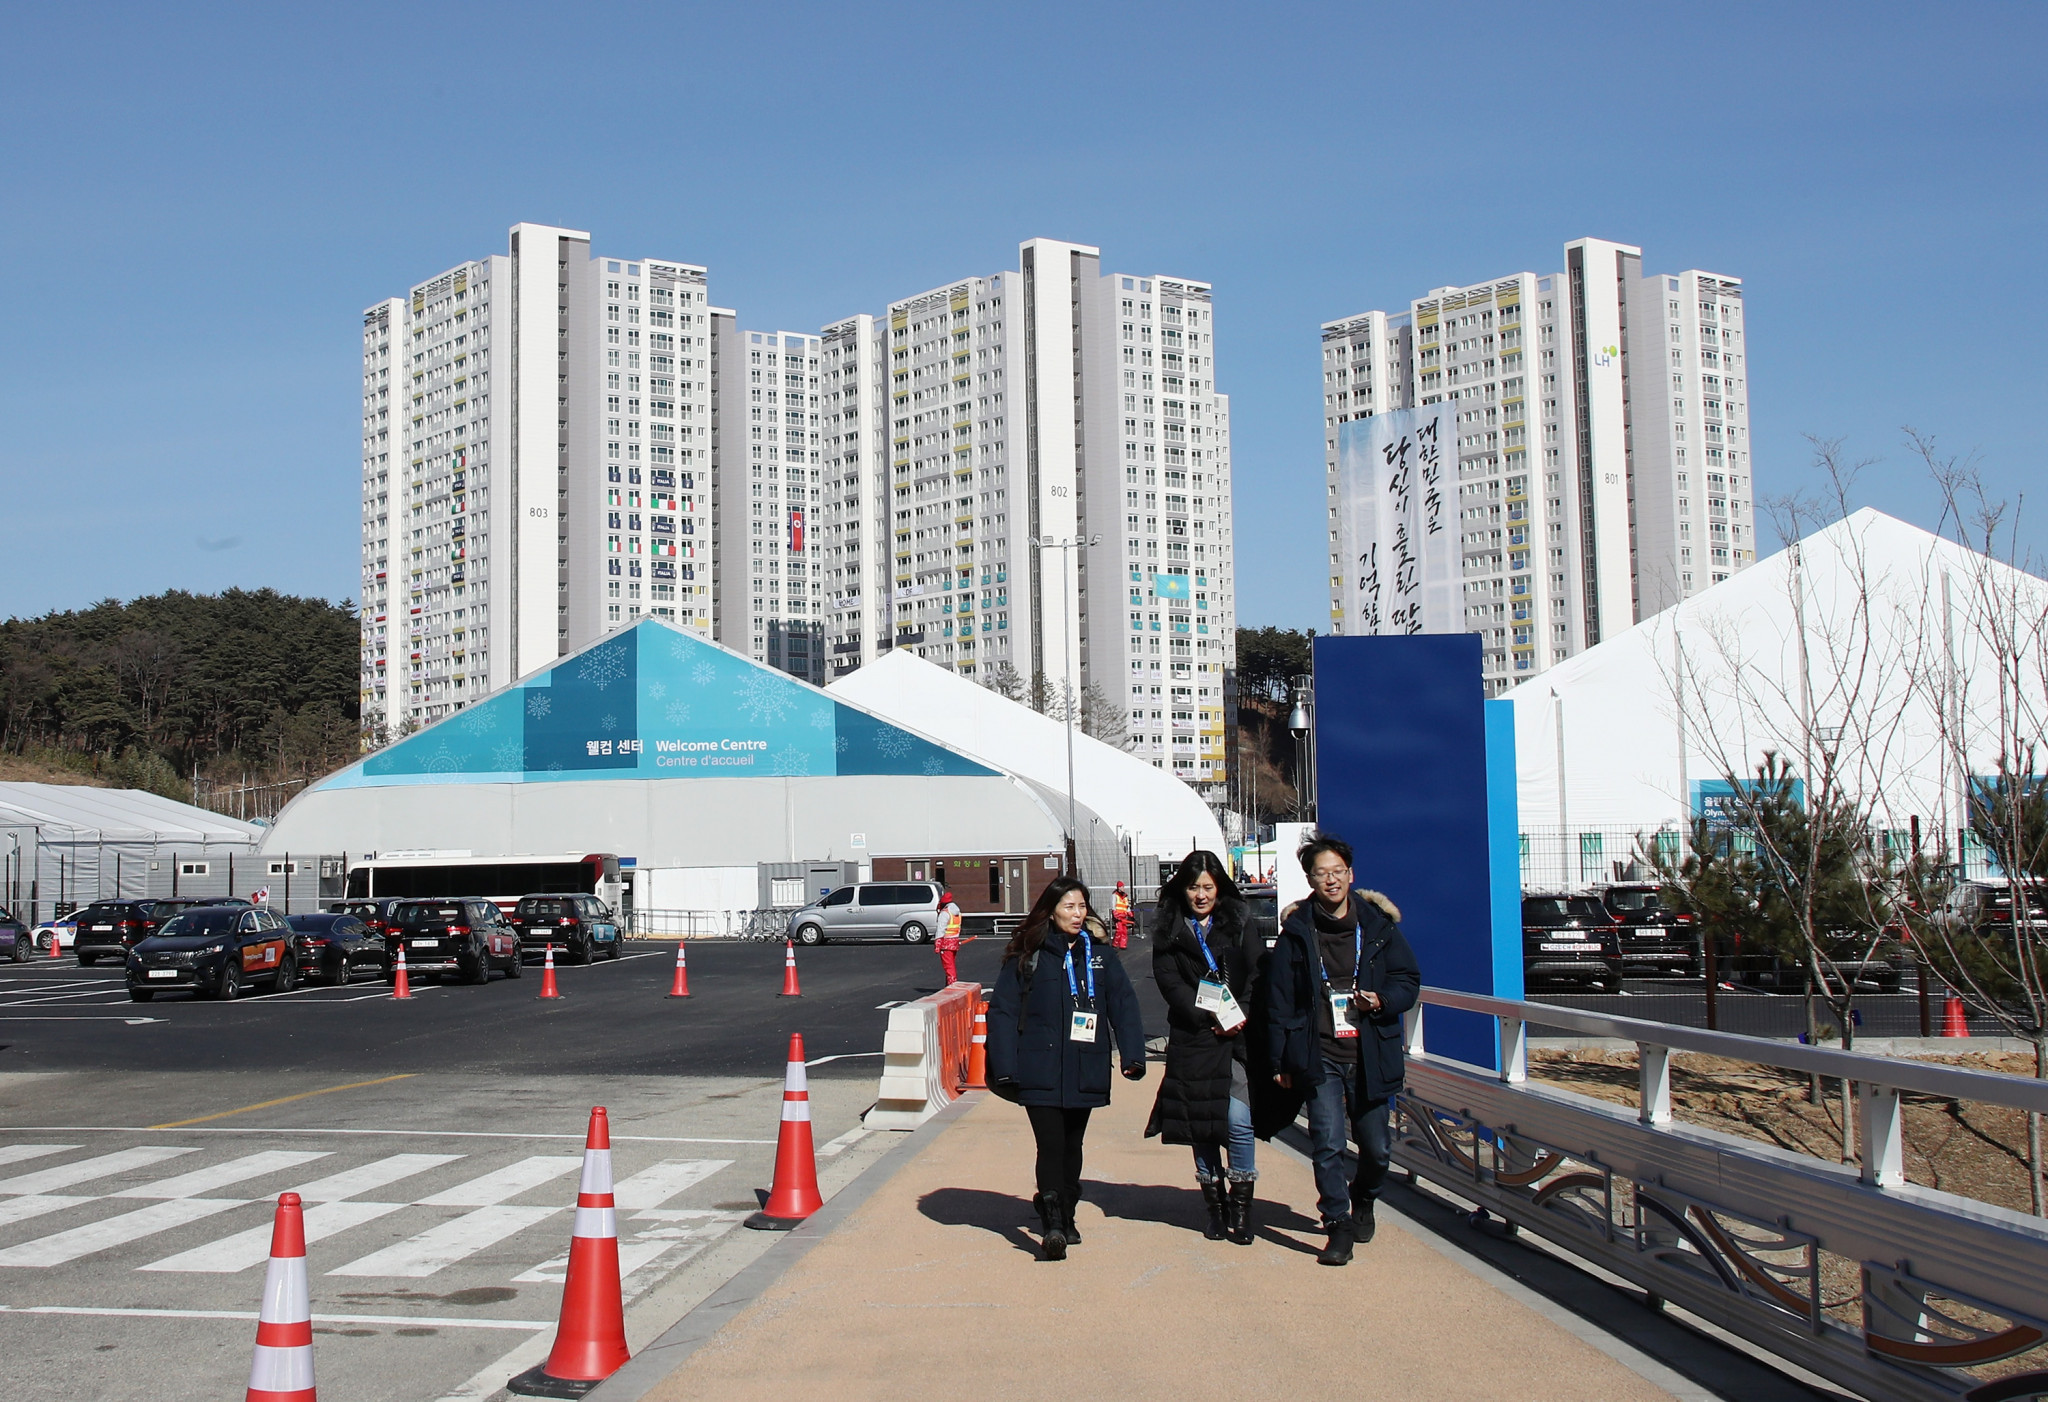 The incident occurred near to the Pyeongchang 2018 Olympic Village ©Getty Images